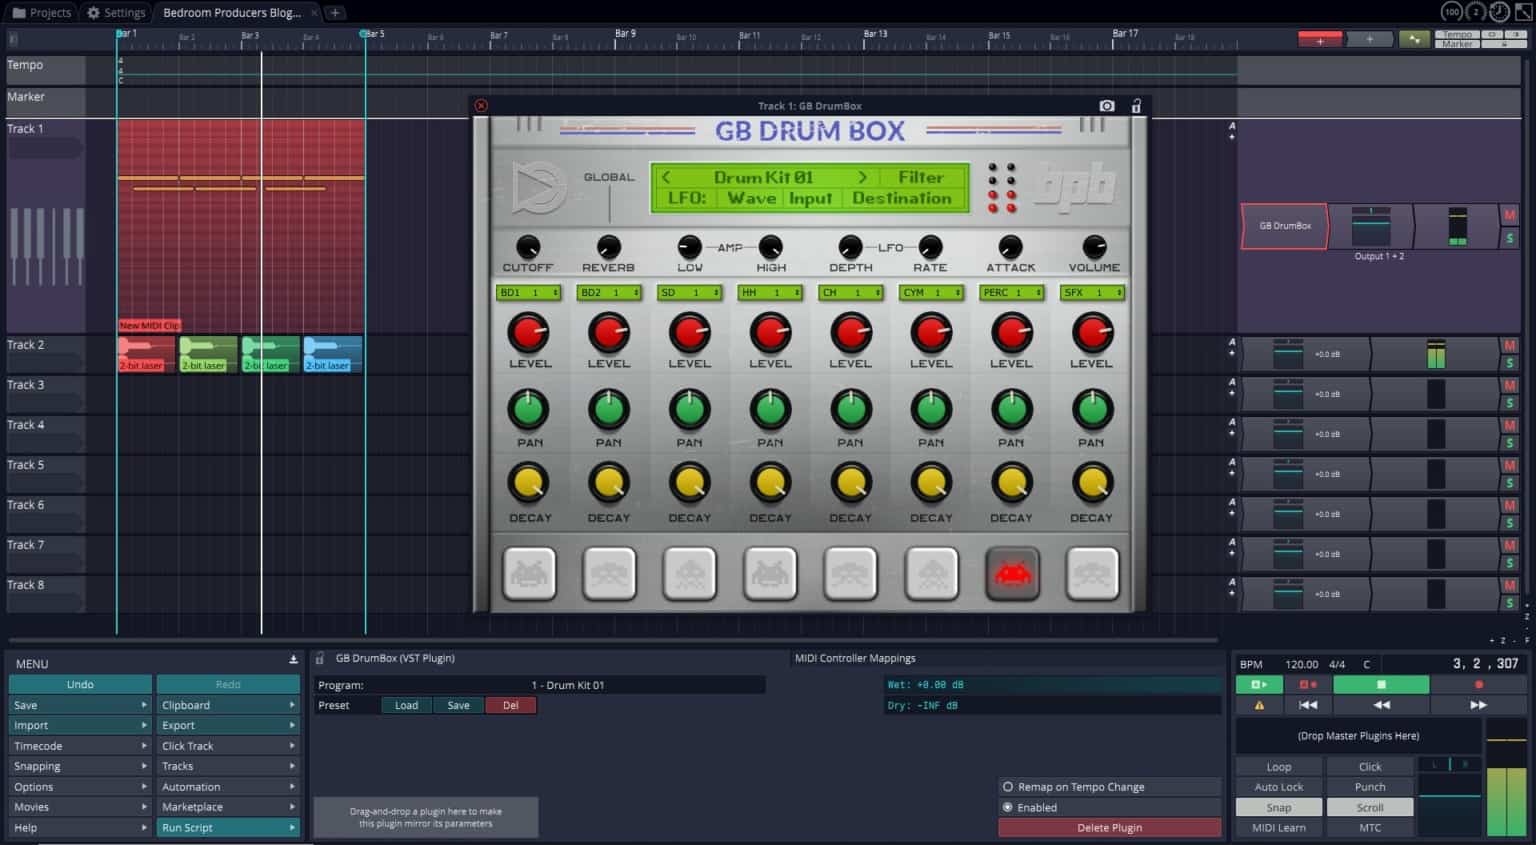 music production software online